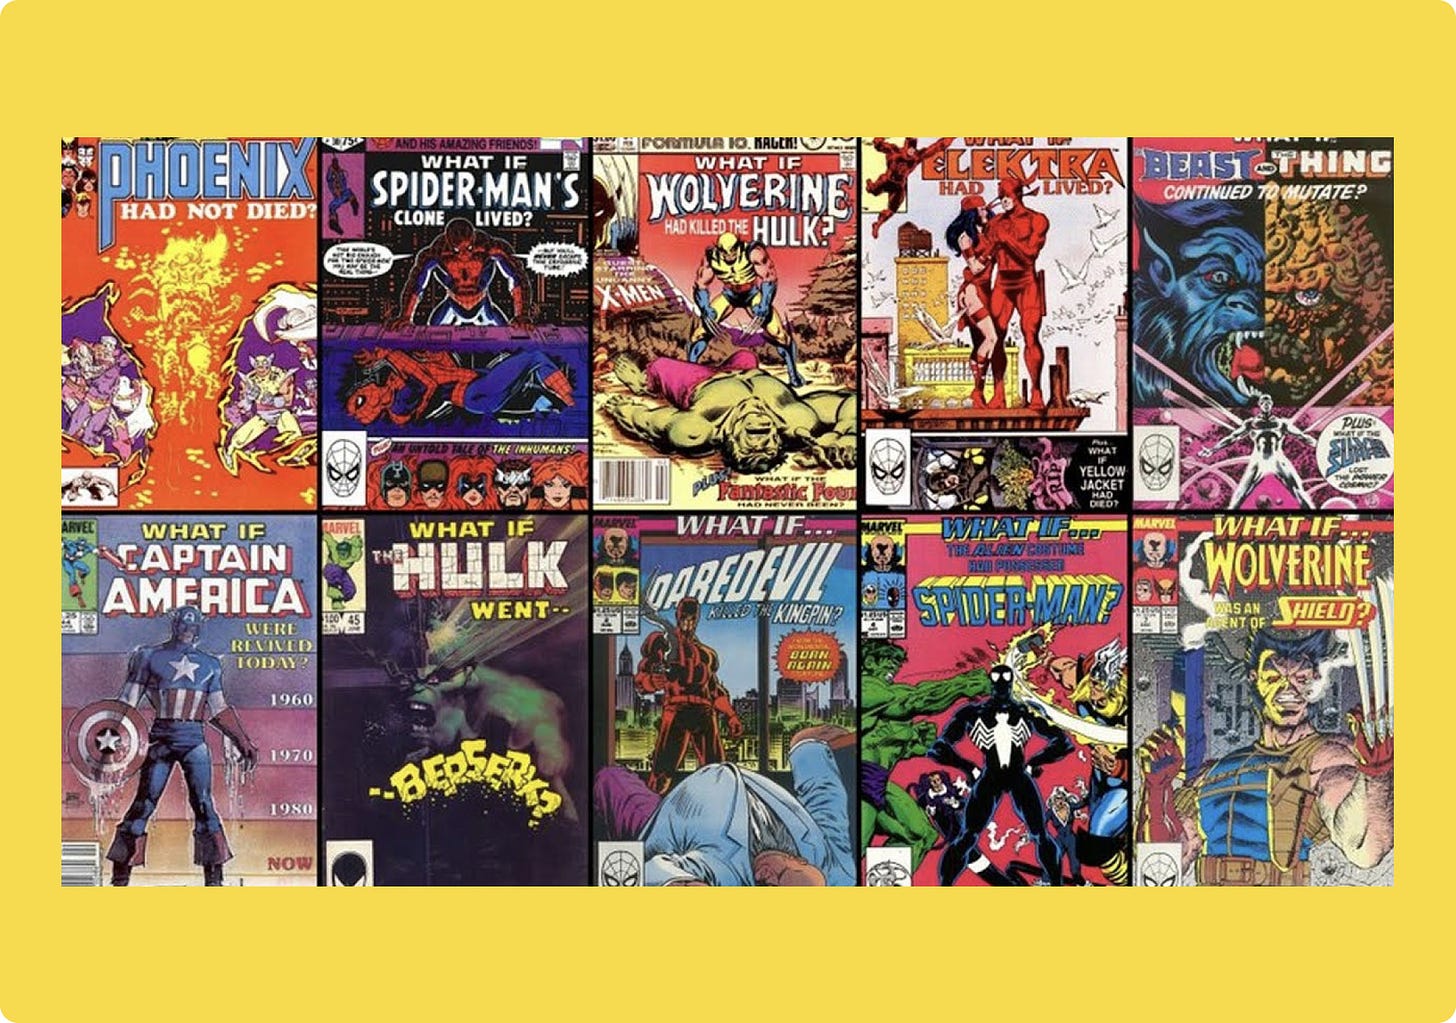 Collection of comic book covers for "What if?..."